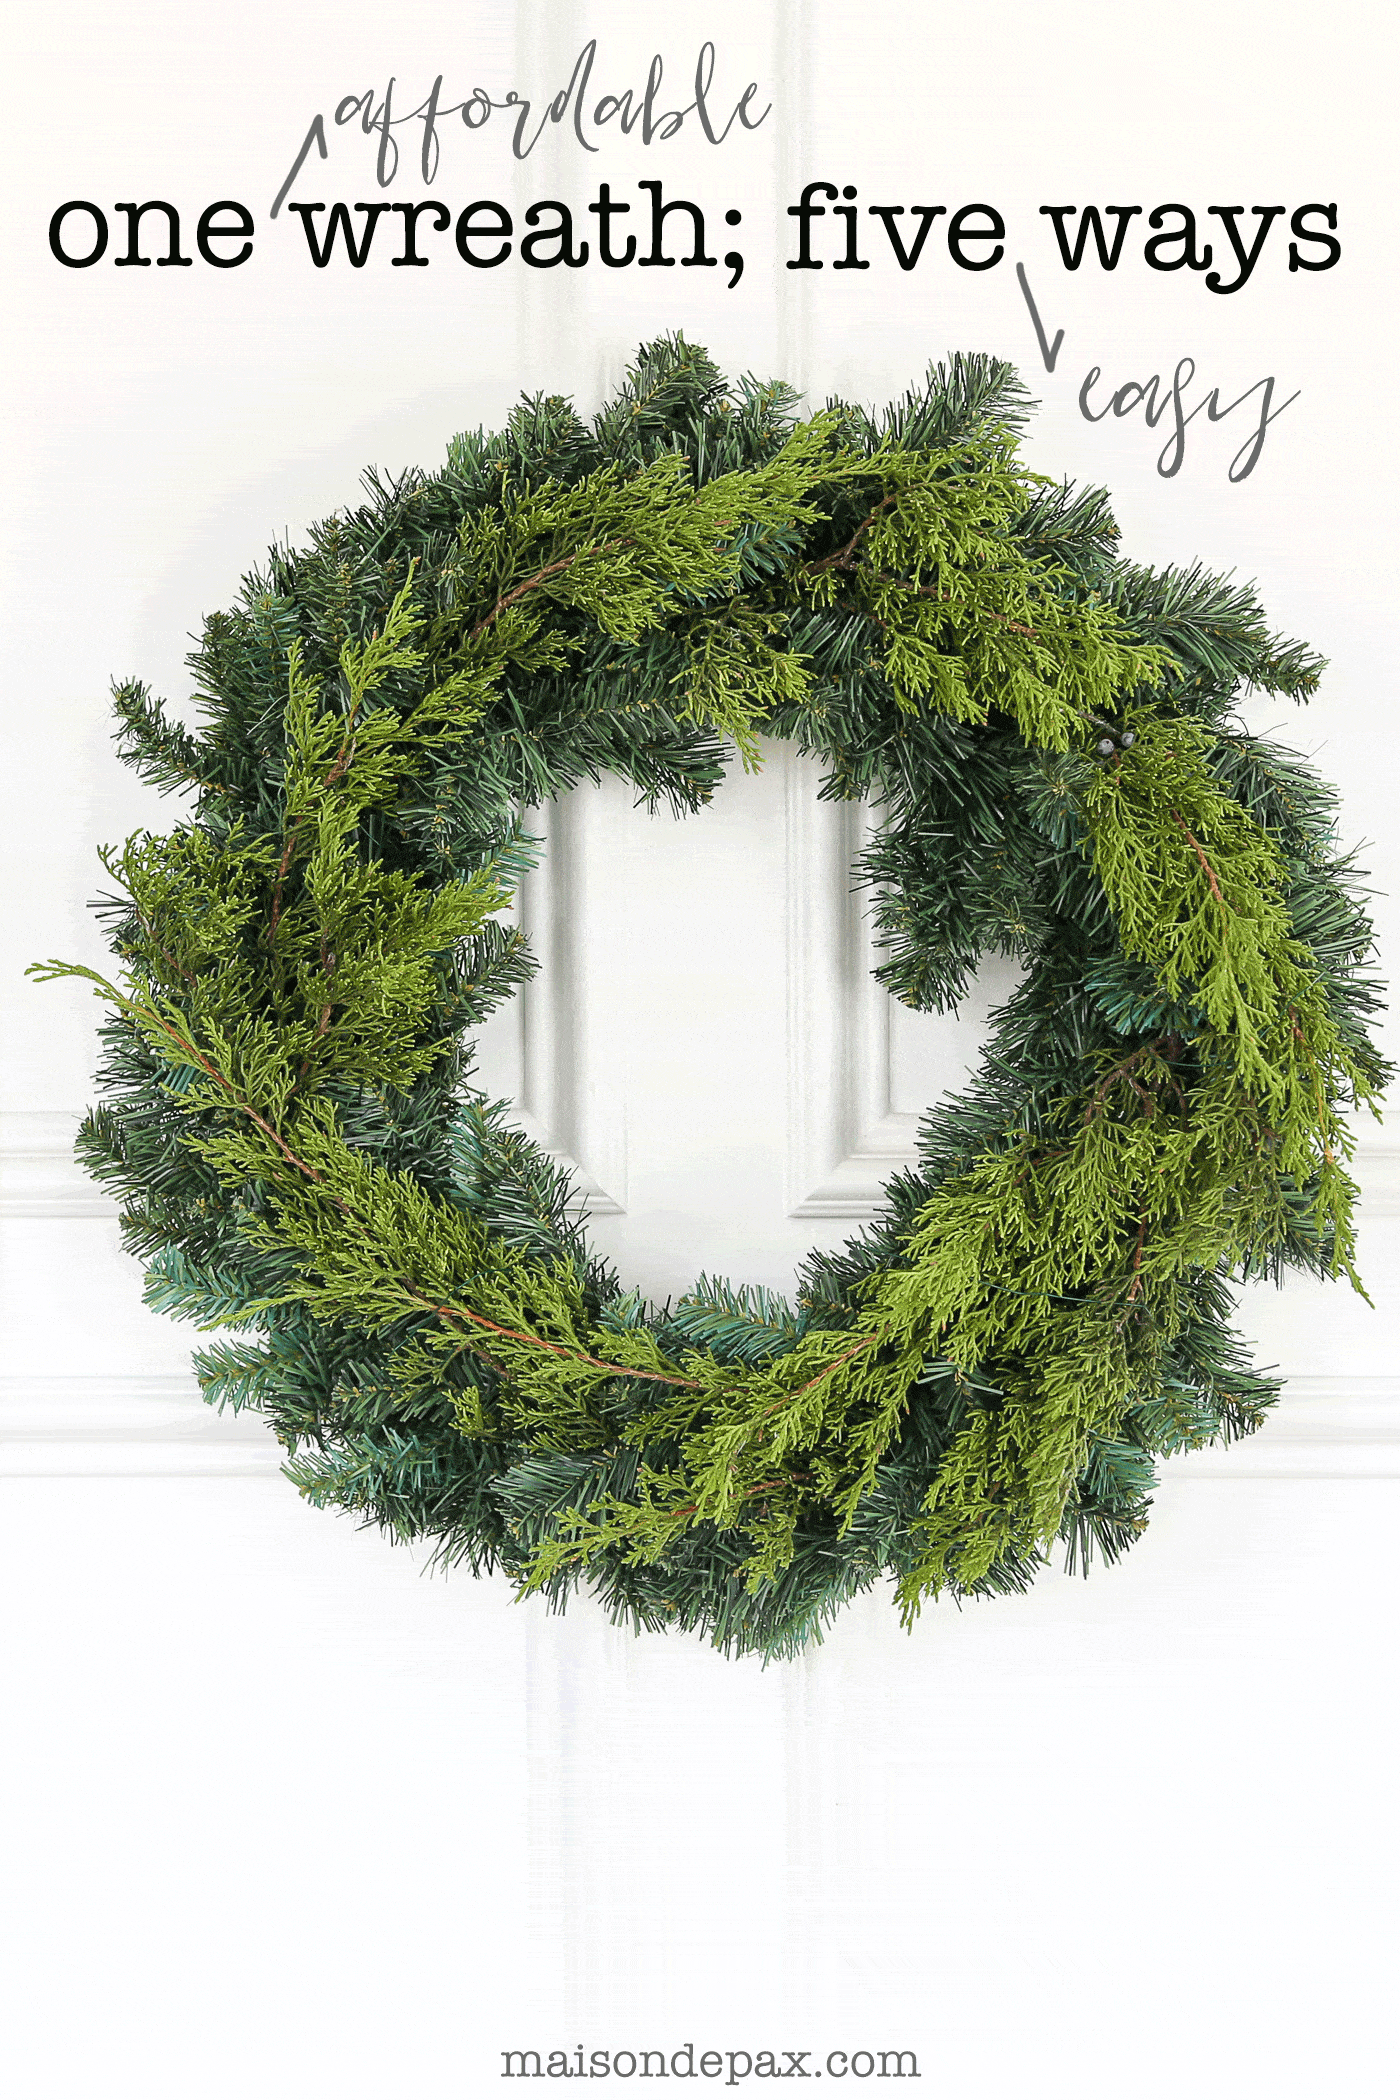 Looking for easy wreath decorating ideas?  Find out five easy ways to decorate one affordable Christmas wreath.  Save on storage and cost with these versatile, easy Christmas wreath ideas! #christmaswreath